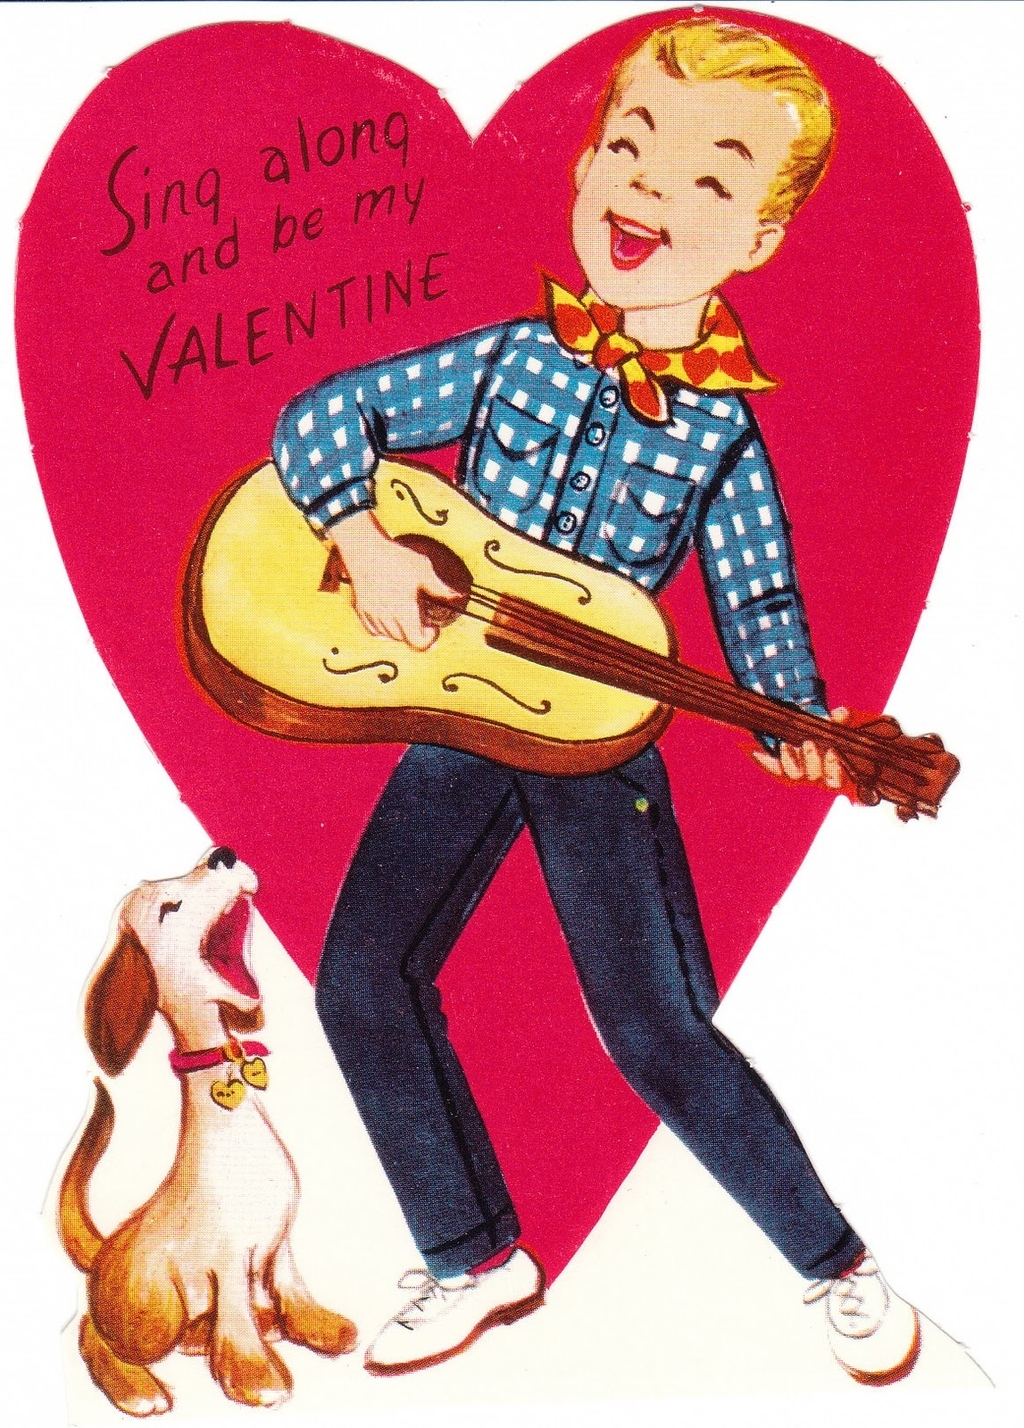 26 Vintage Valentines Cards That Will Warm Your Heart